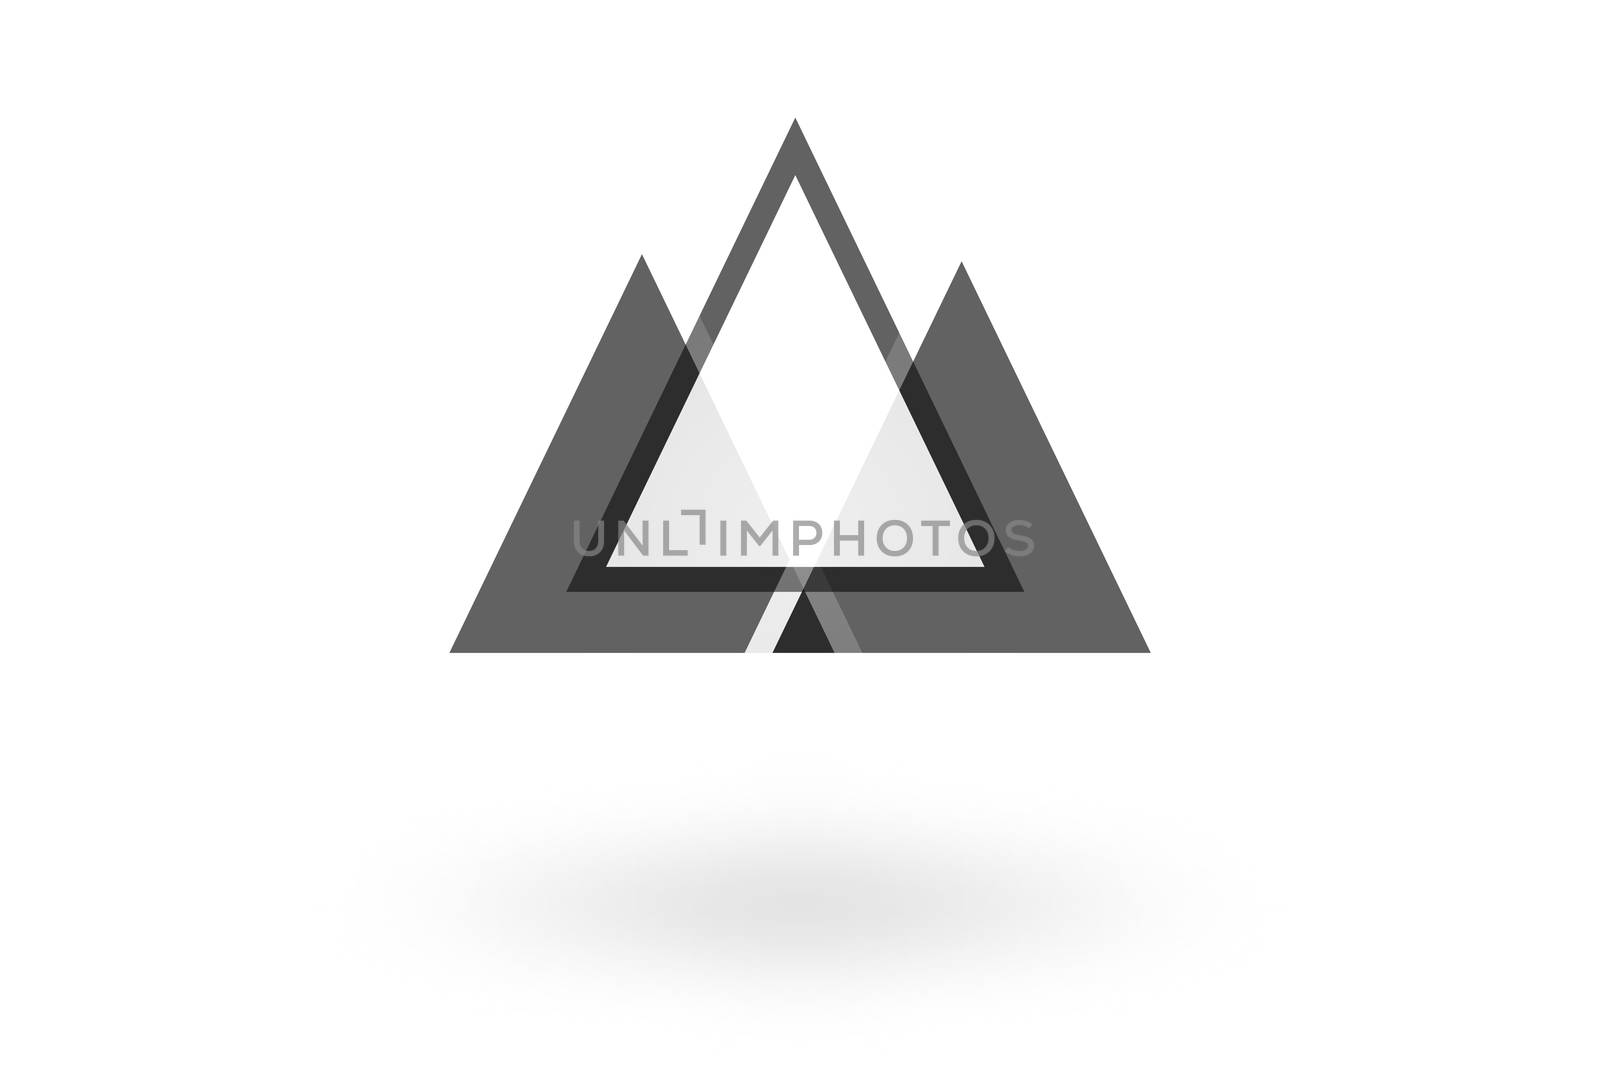 Abstract geometric pattern, monochrome triangle overlapping logo on white background by mouu007